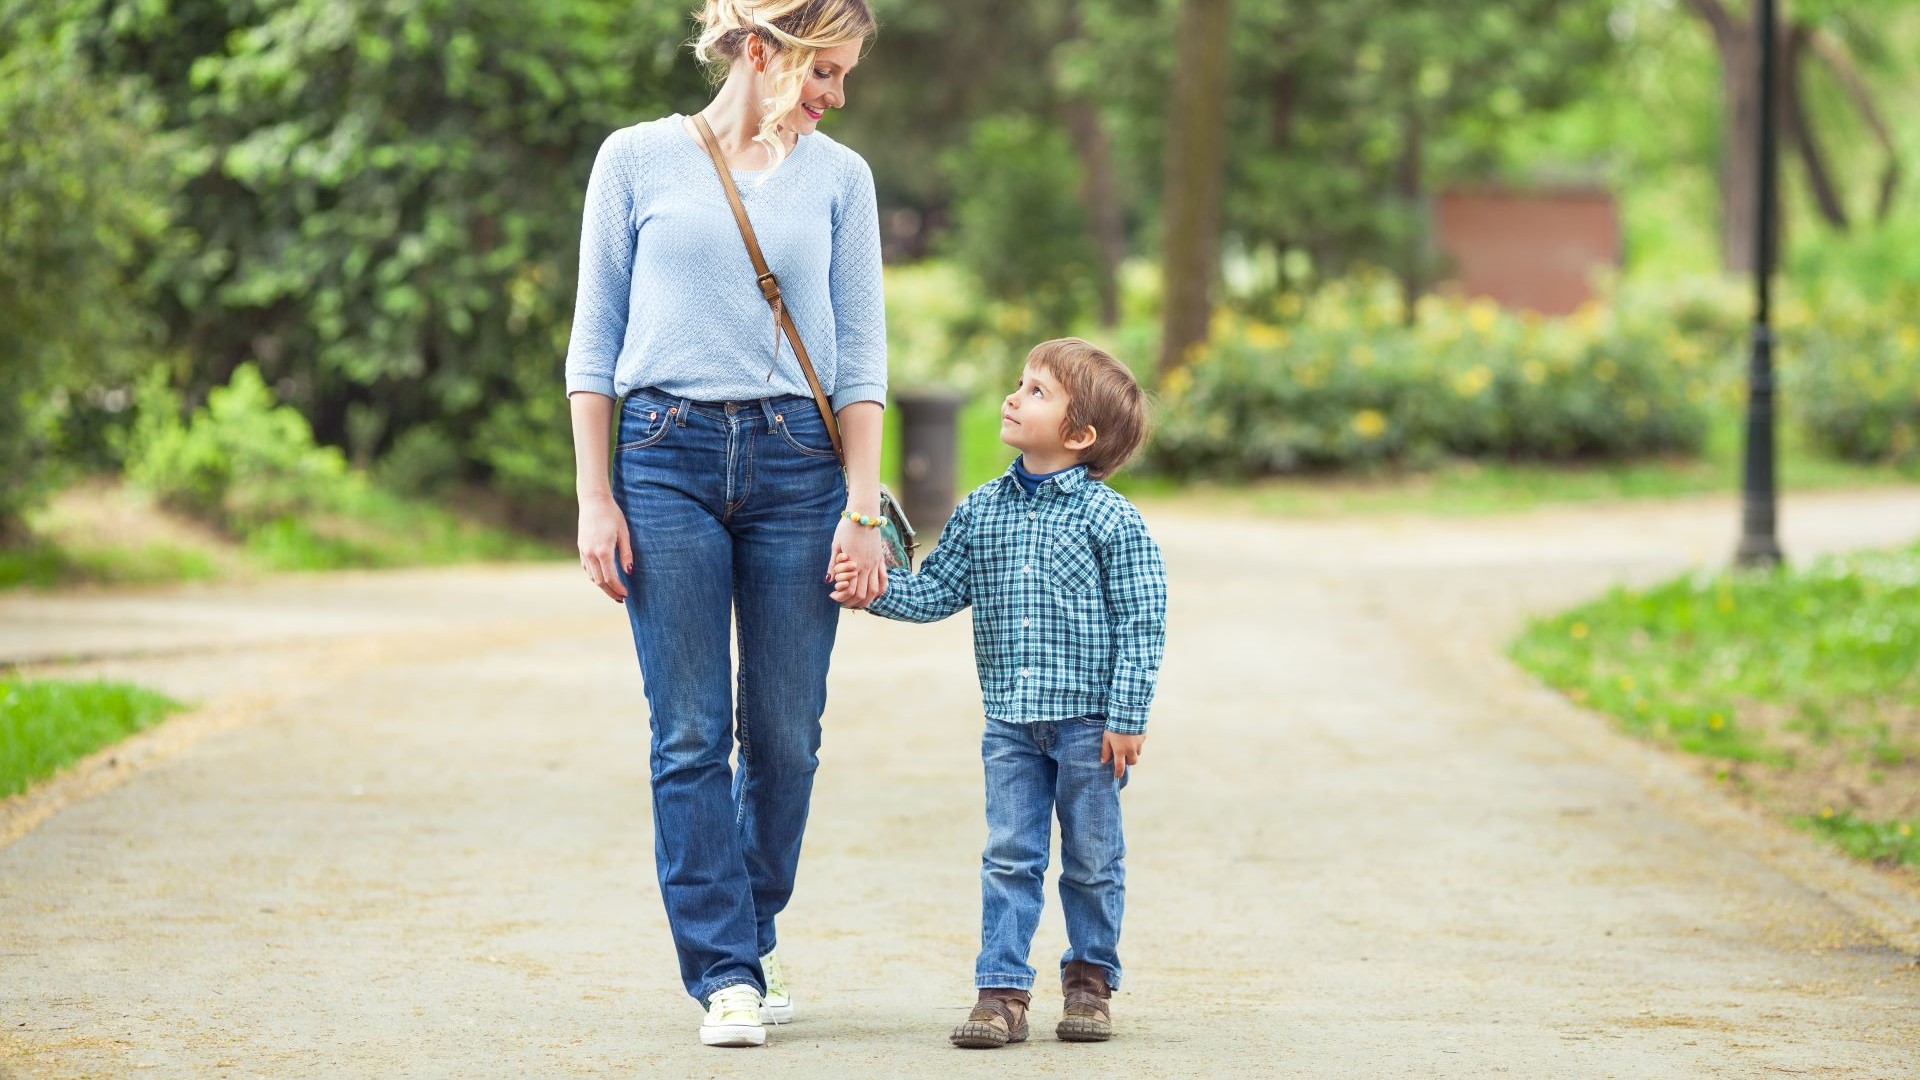 When Can Child Custody Be Modified?